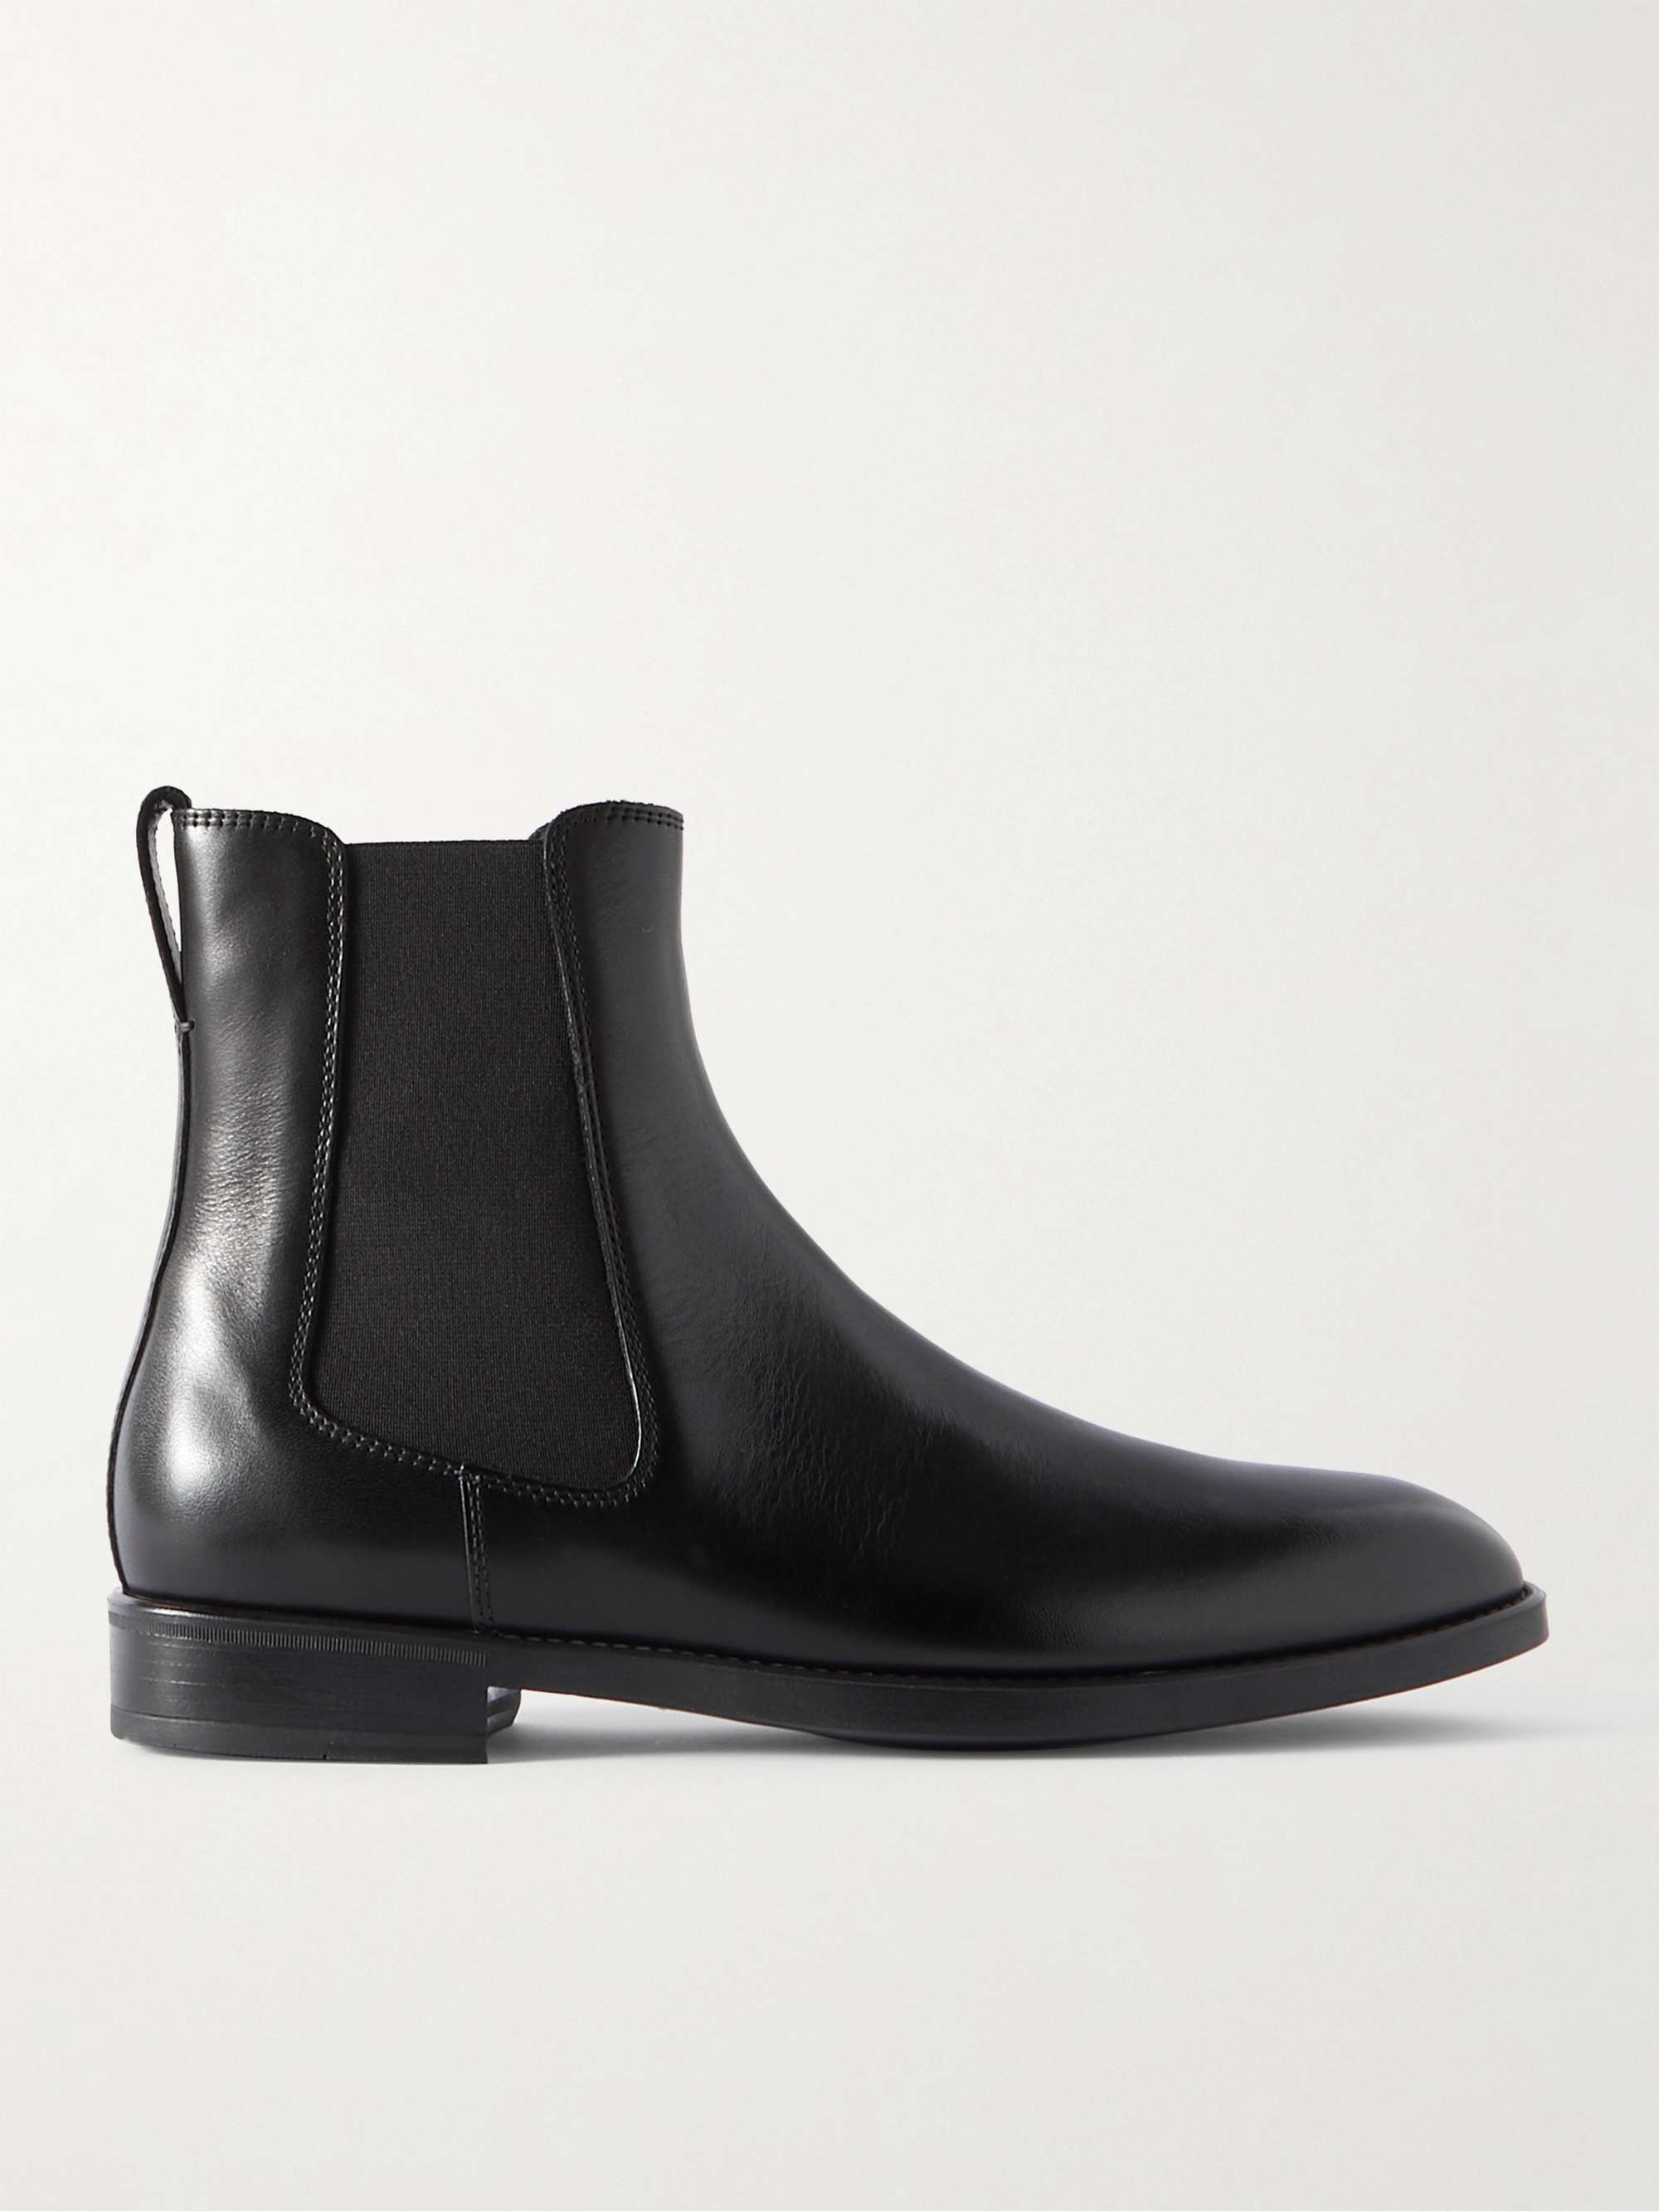 TOM FORD Robert Polished-Leather Chelsea Boots